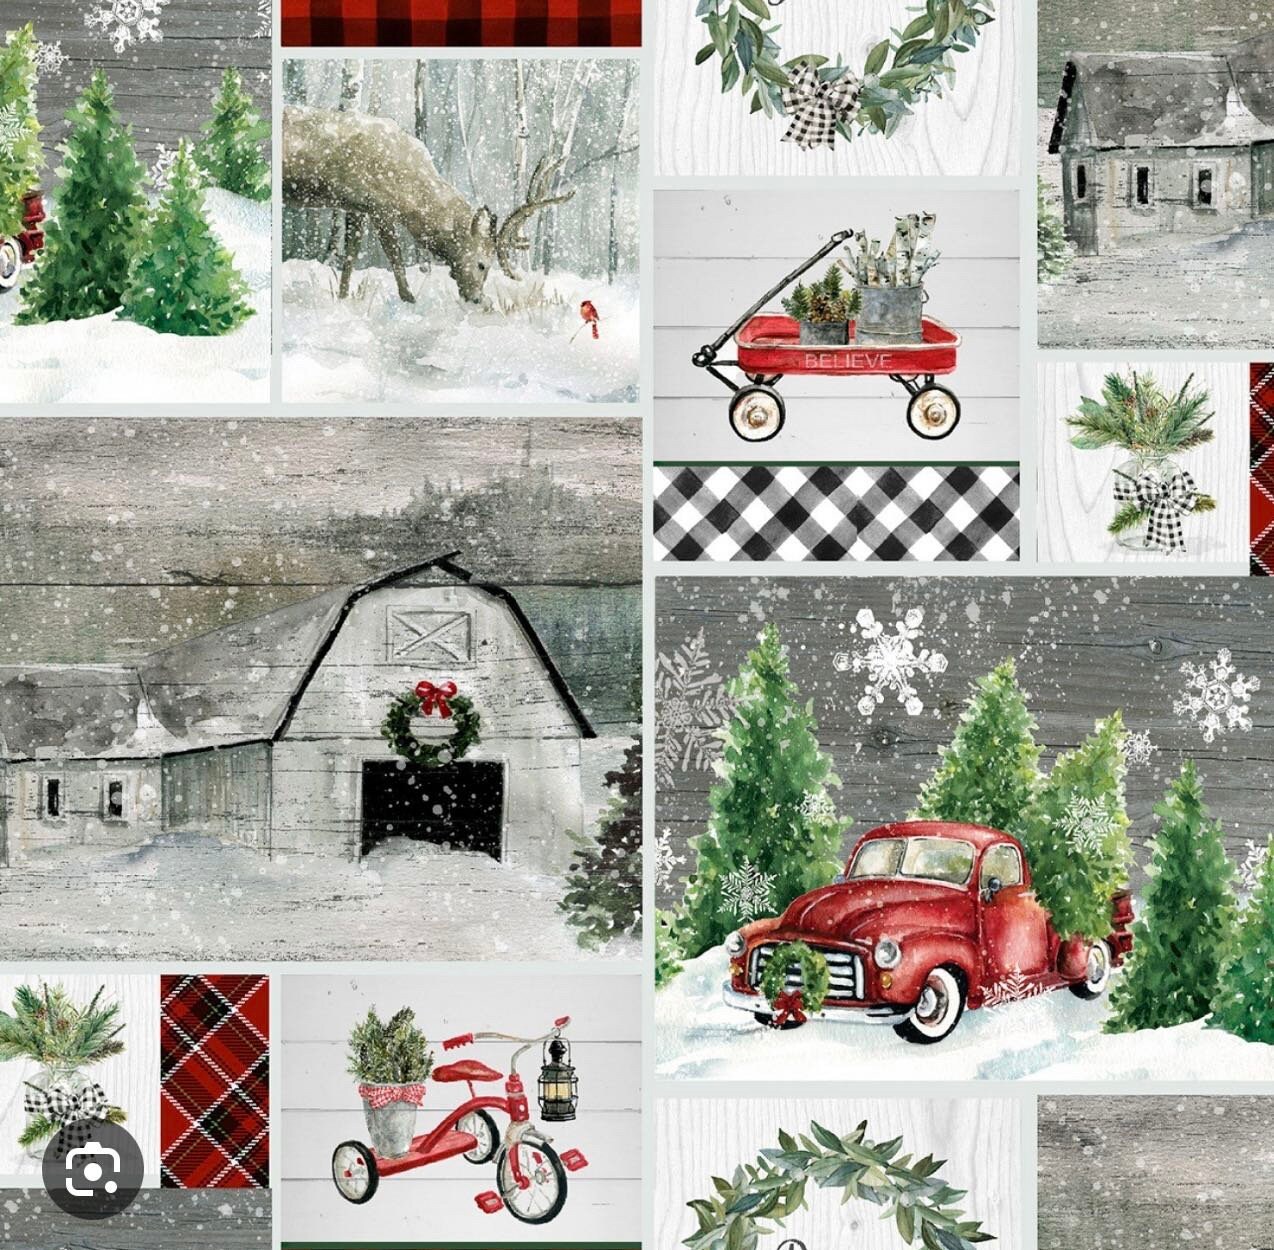 Quilt Fabric, Home for the Holidays, Christmas, Snowmen, Christmas Scene,  Trees, Plaid, Reindeer, Beth Albert, 3 Wishes Fabric